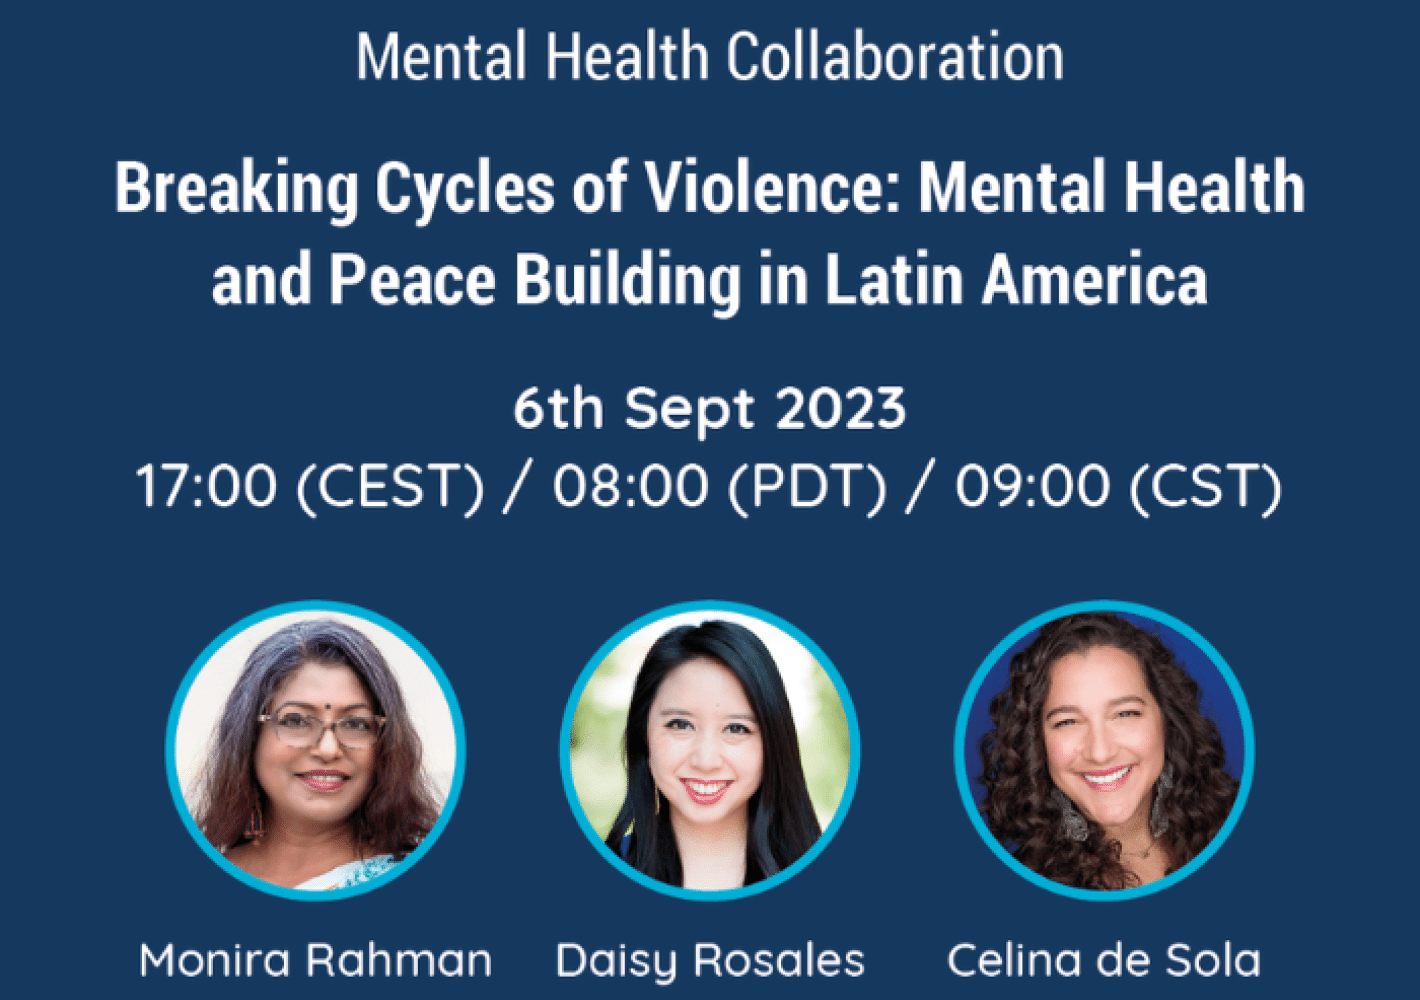 Breaking Cycles of Violence Mental Health and Peace Building in Latin America.png